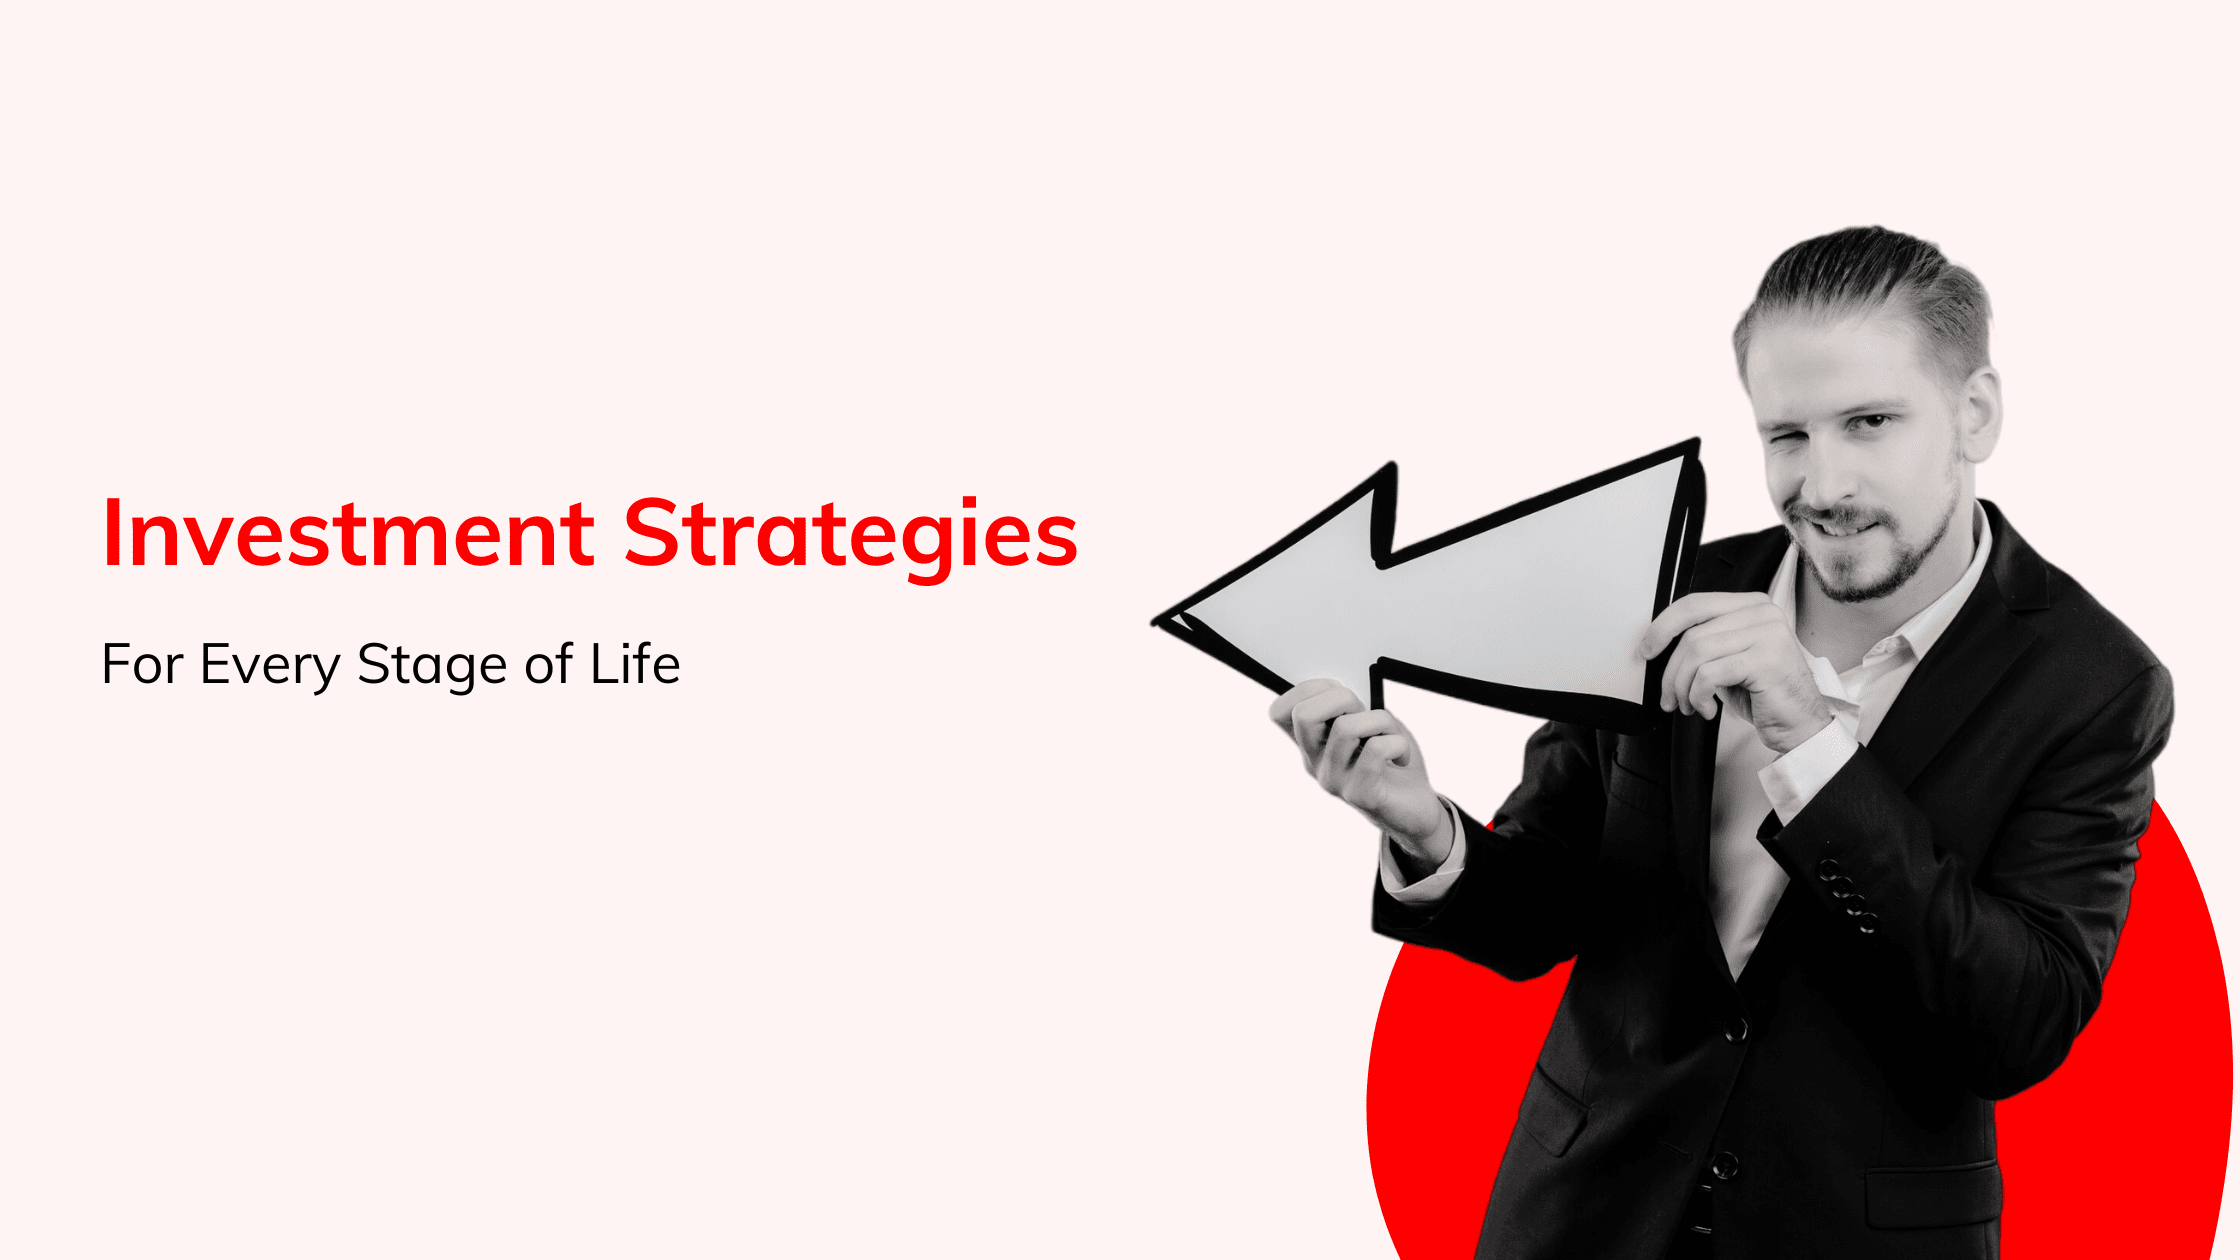 investment strategies-every stage of life